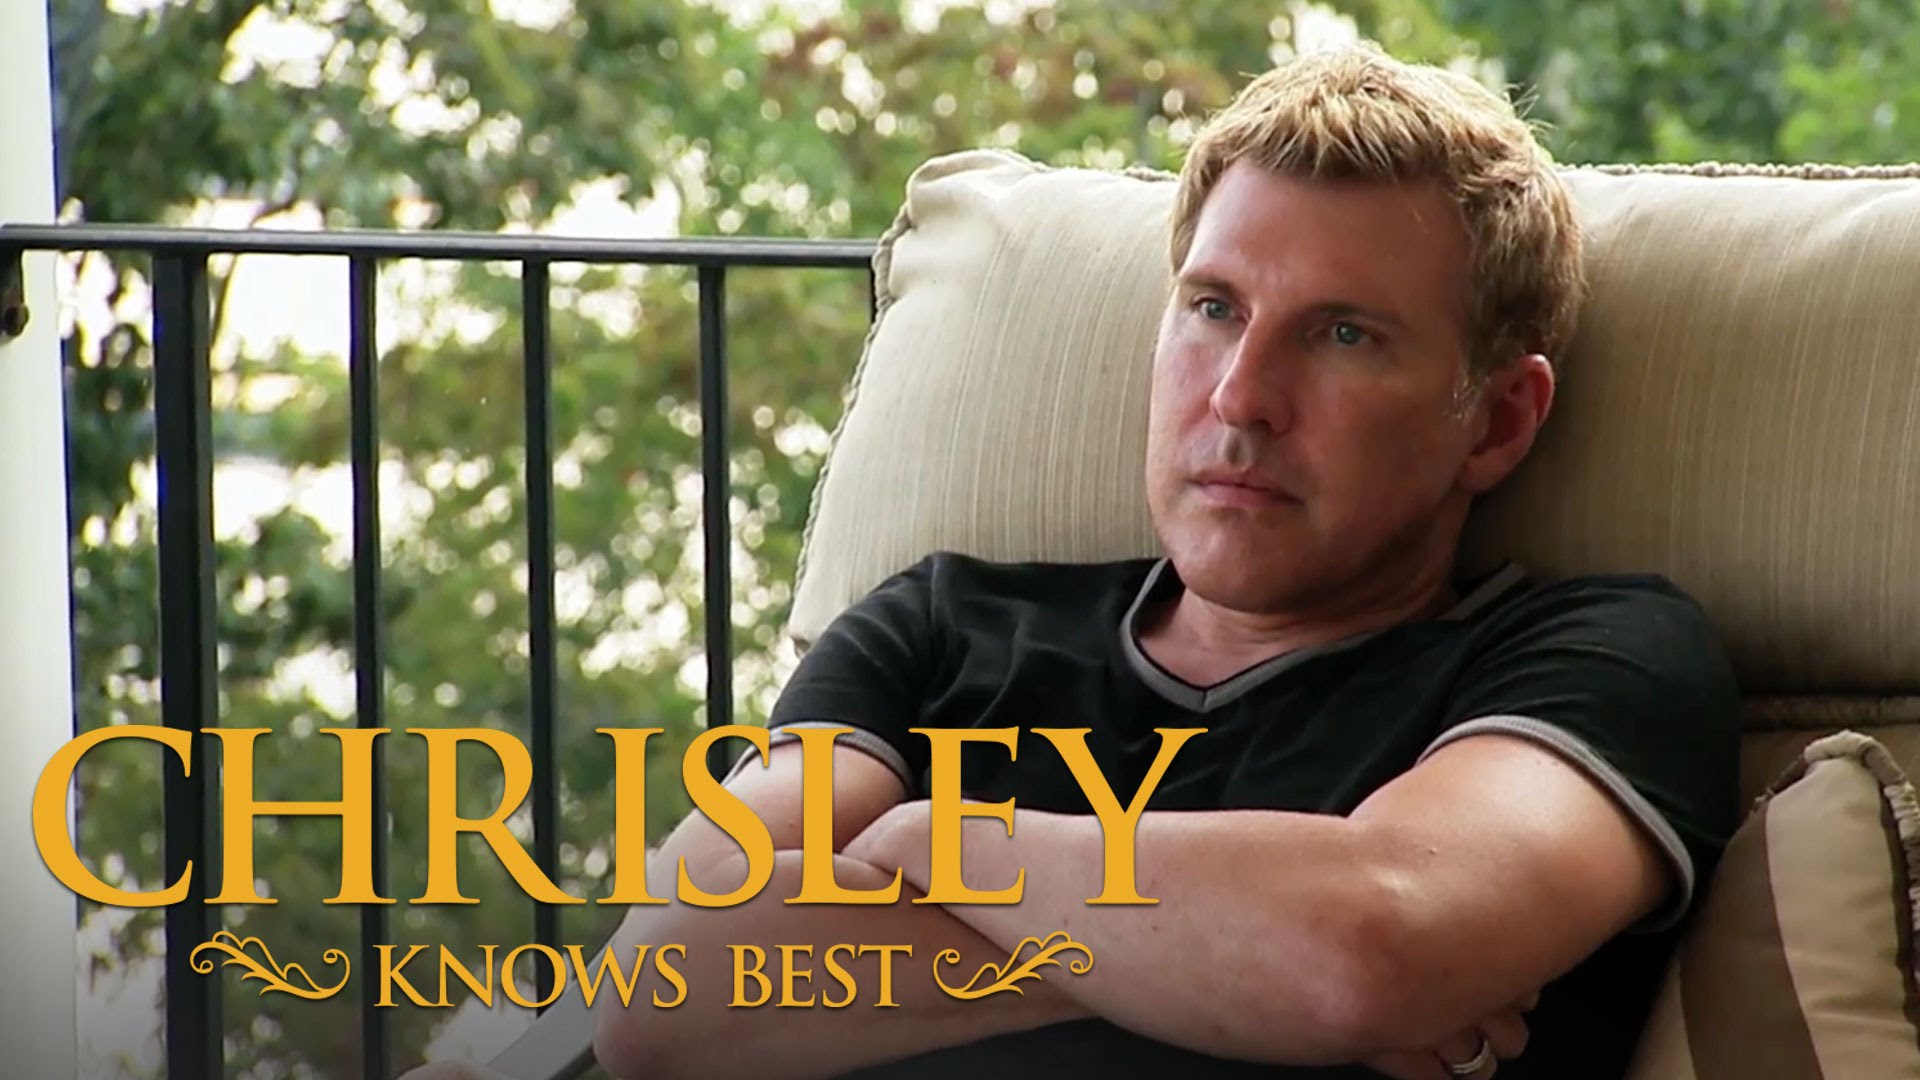 Chrisley Knows Best #9